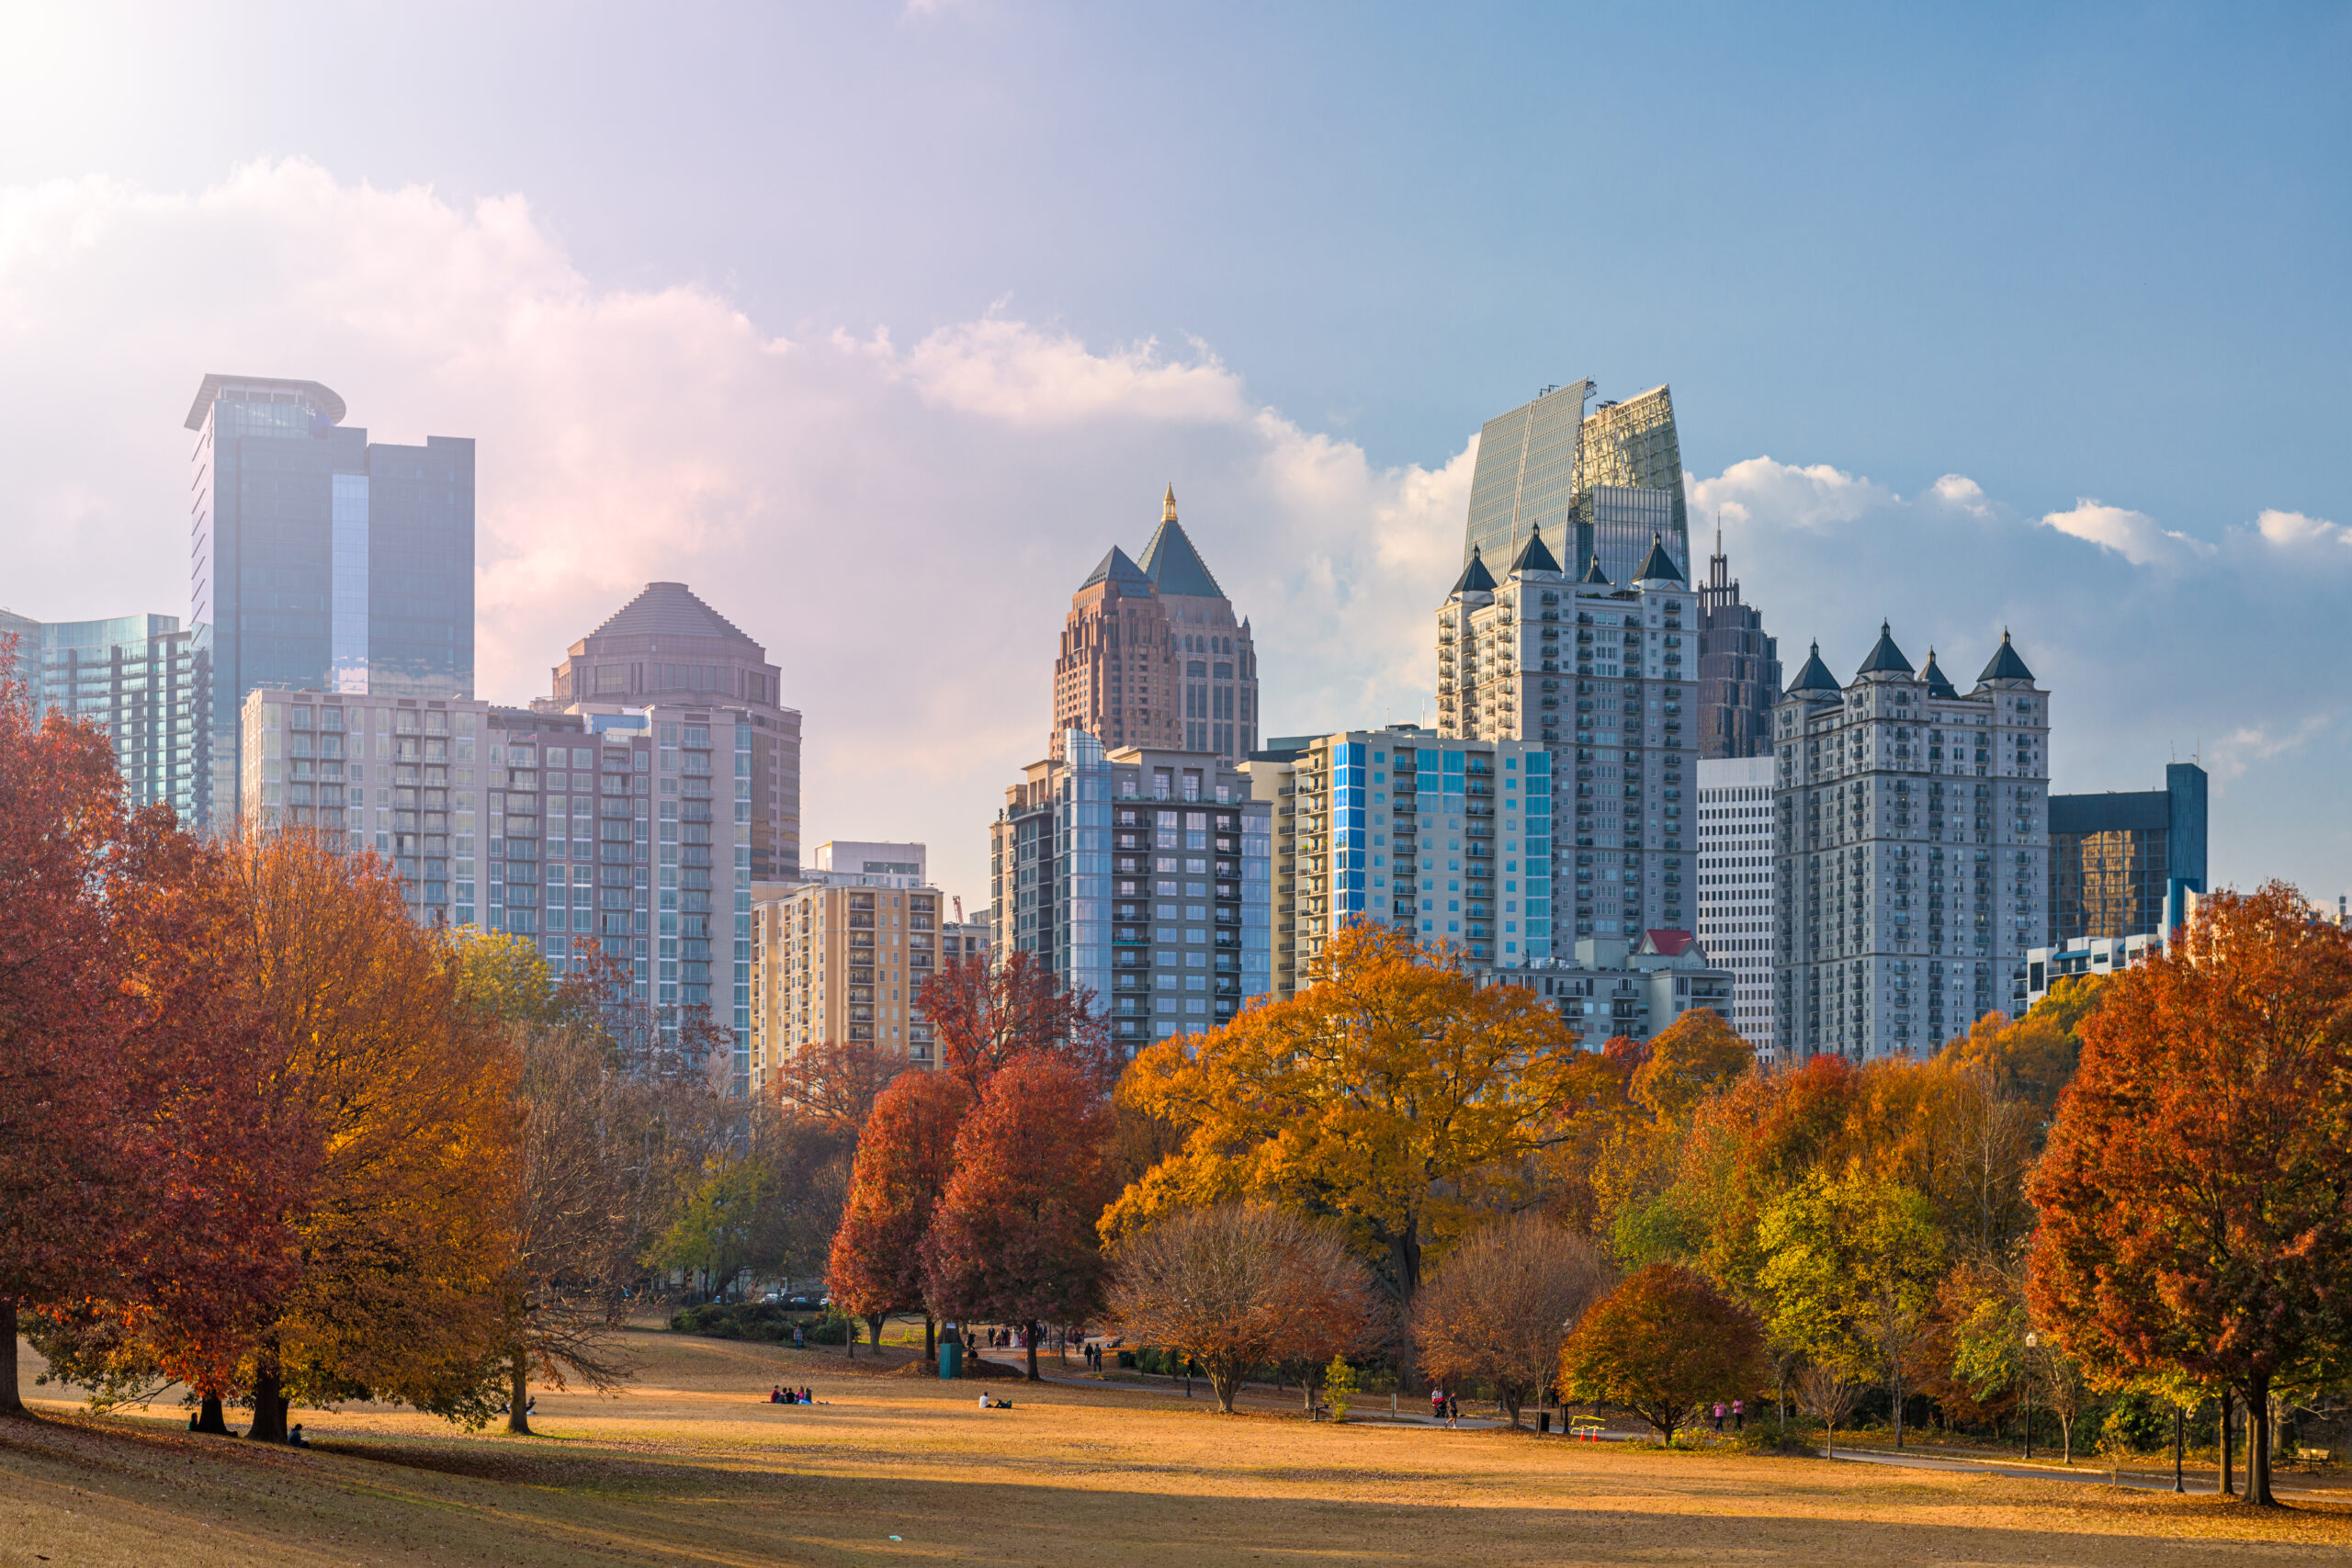 A picturesque city skyline with trees in the background, capturing the vibrant essence of Hotlanta.